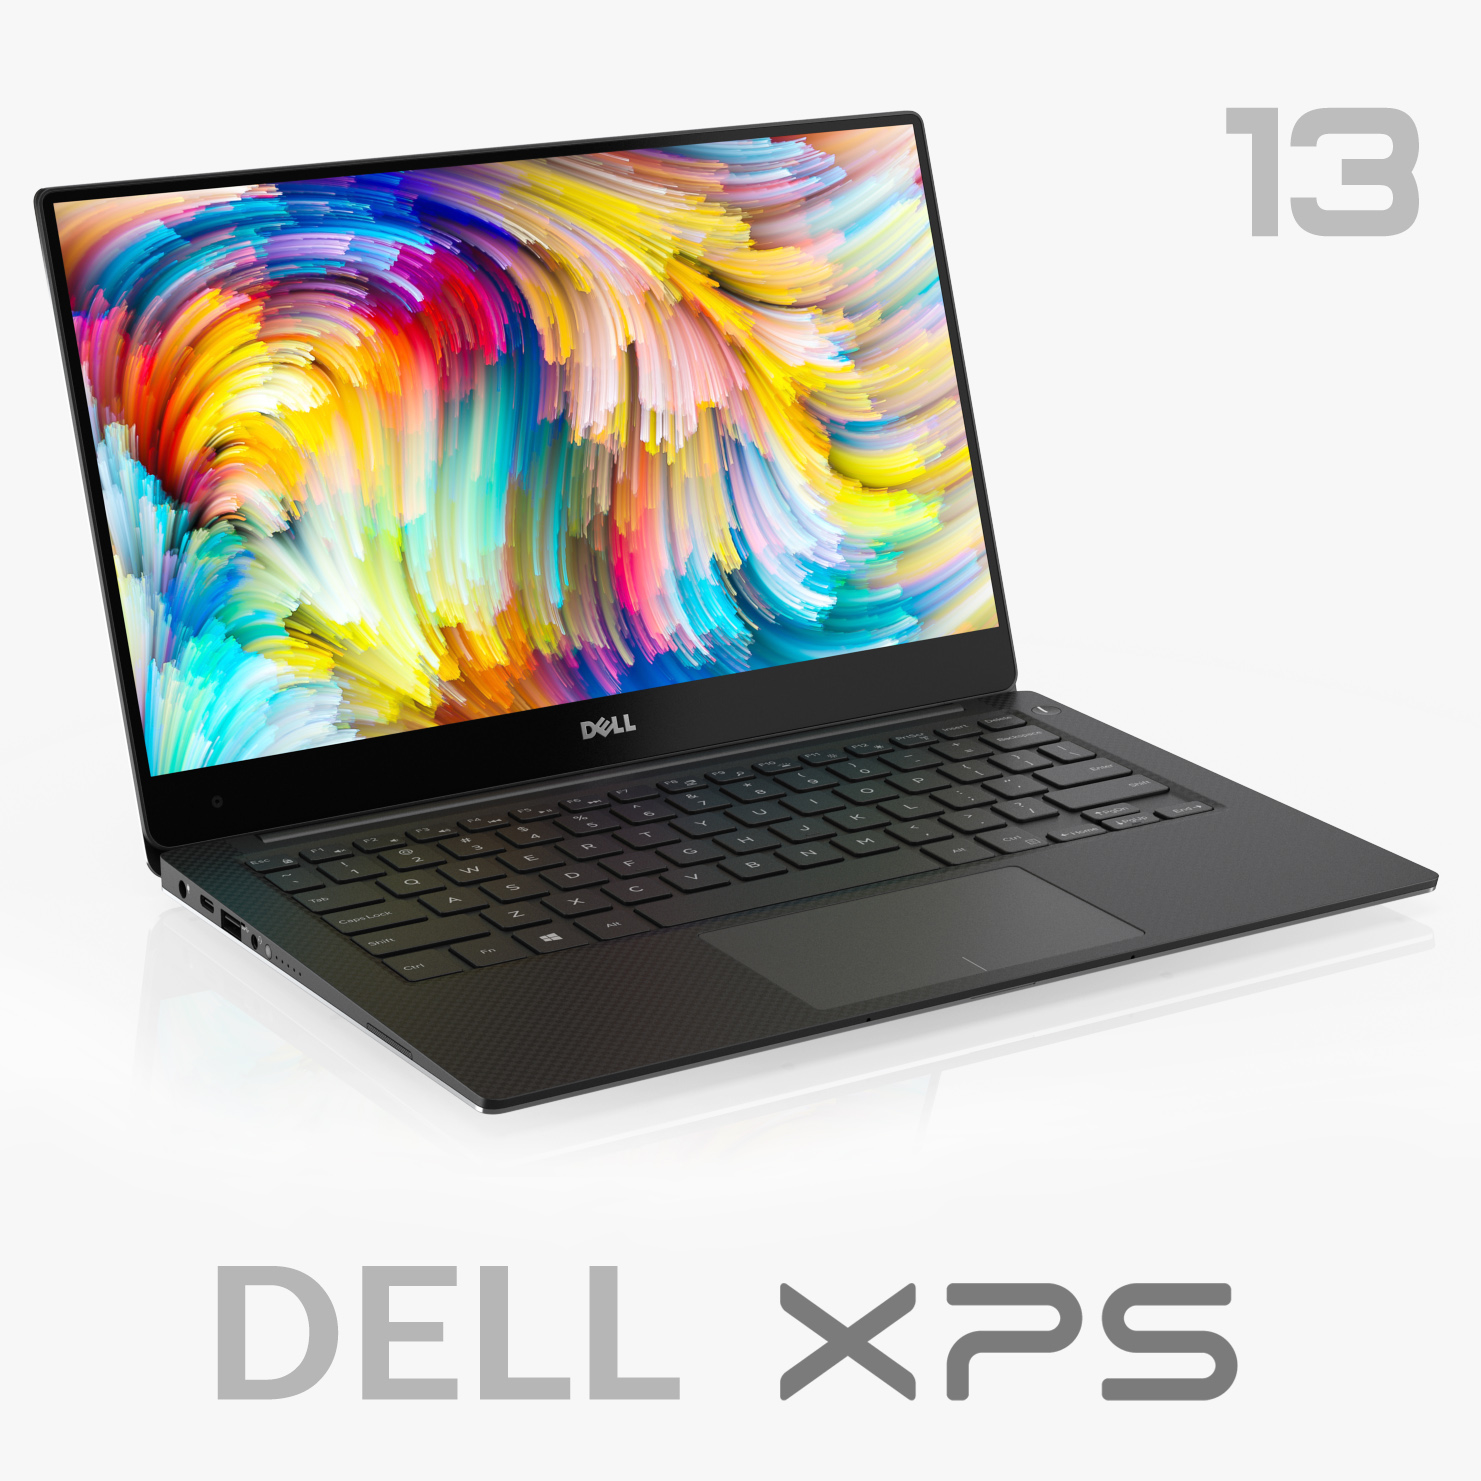 Dell XPS Laptop Prices in Kenya